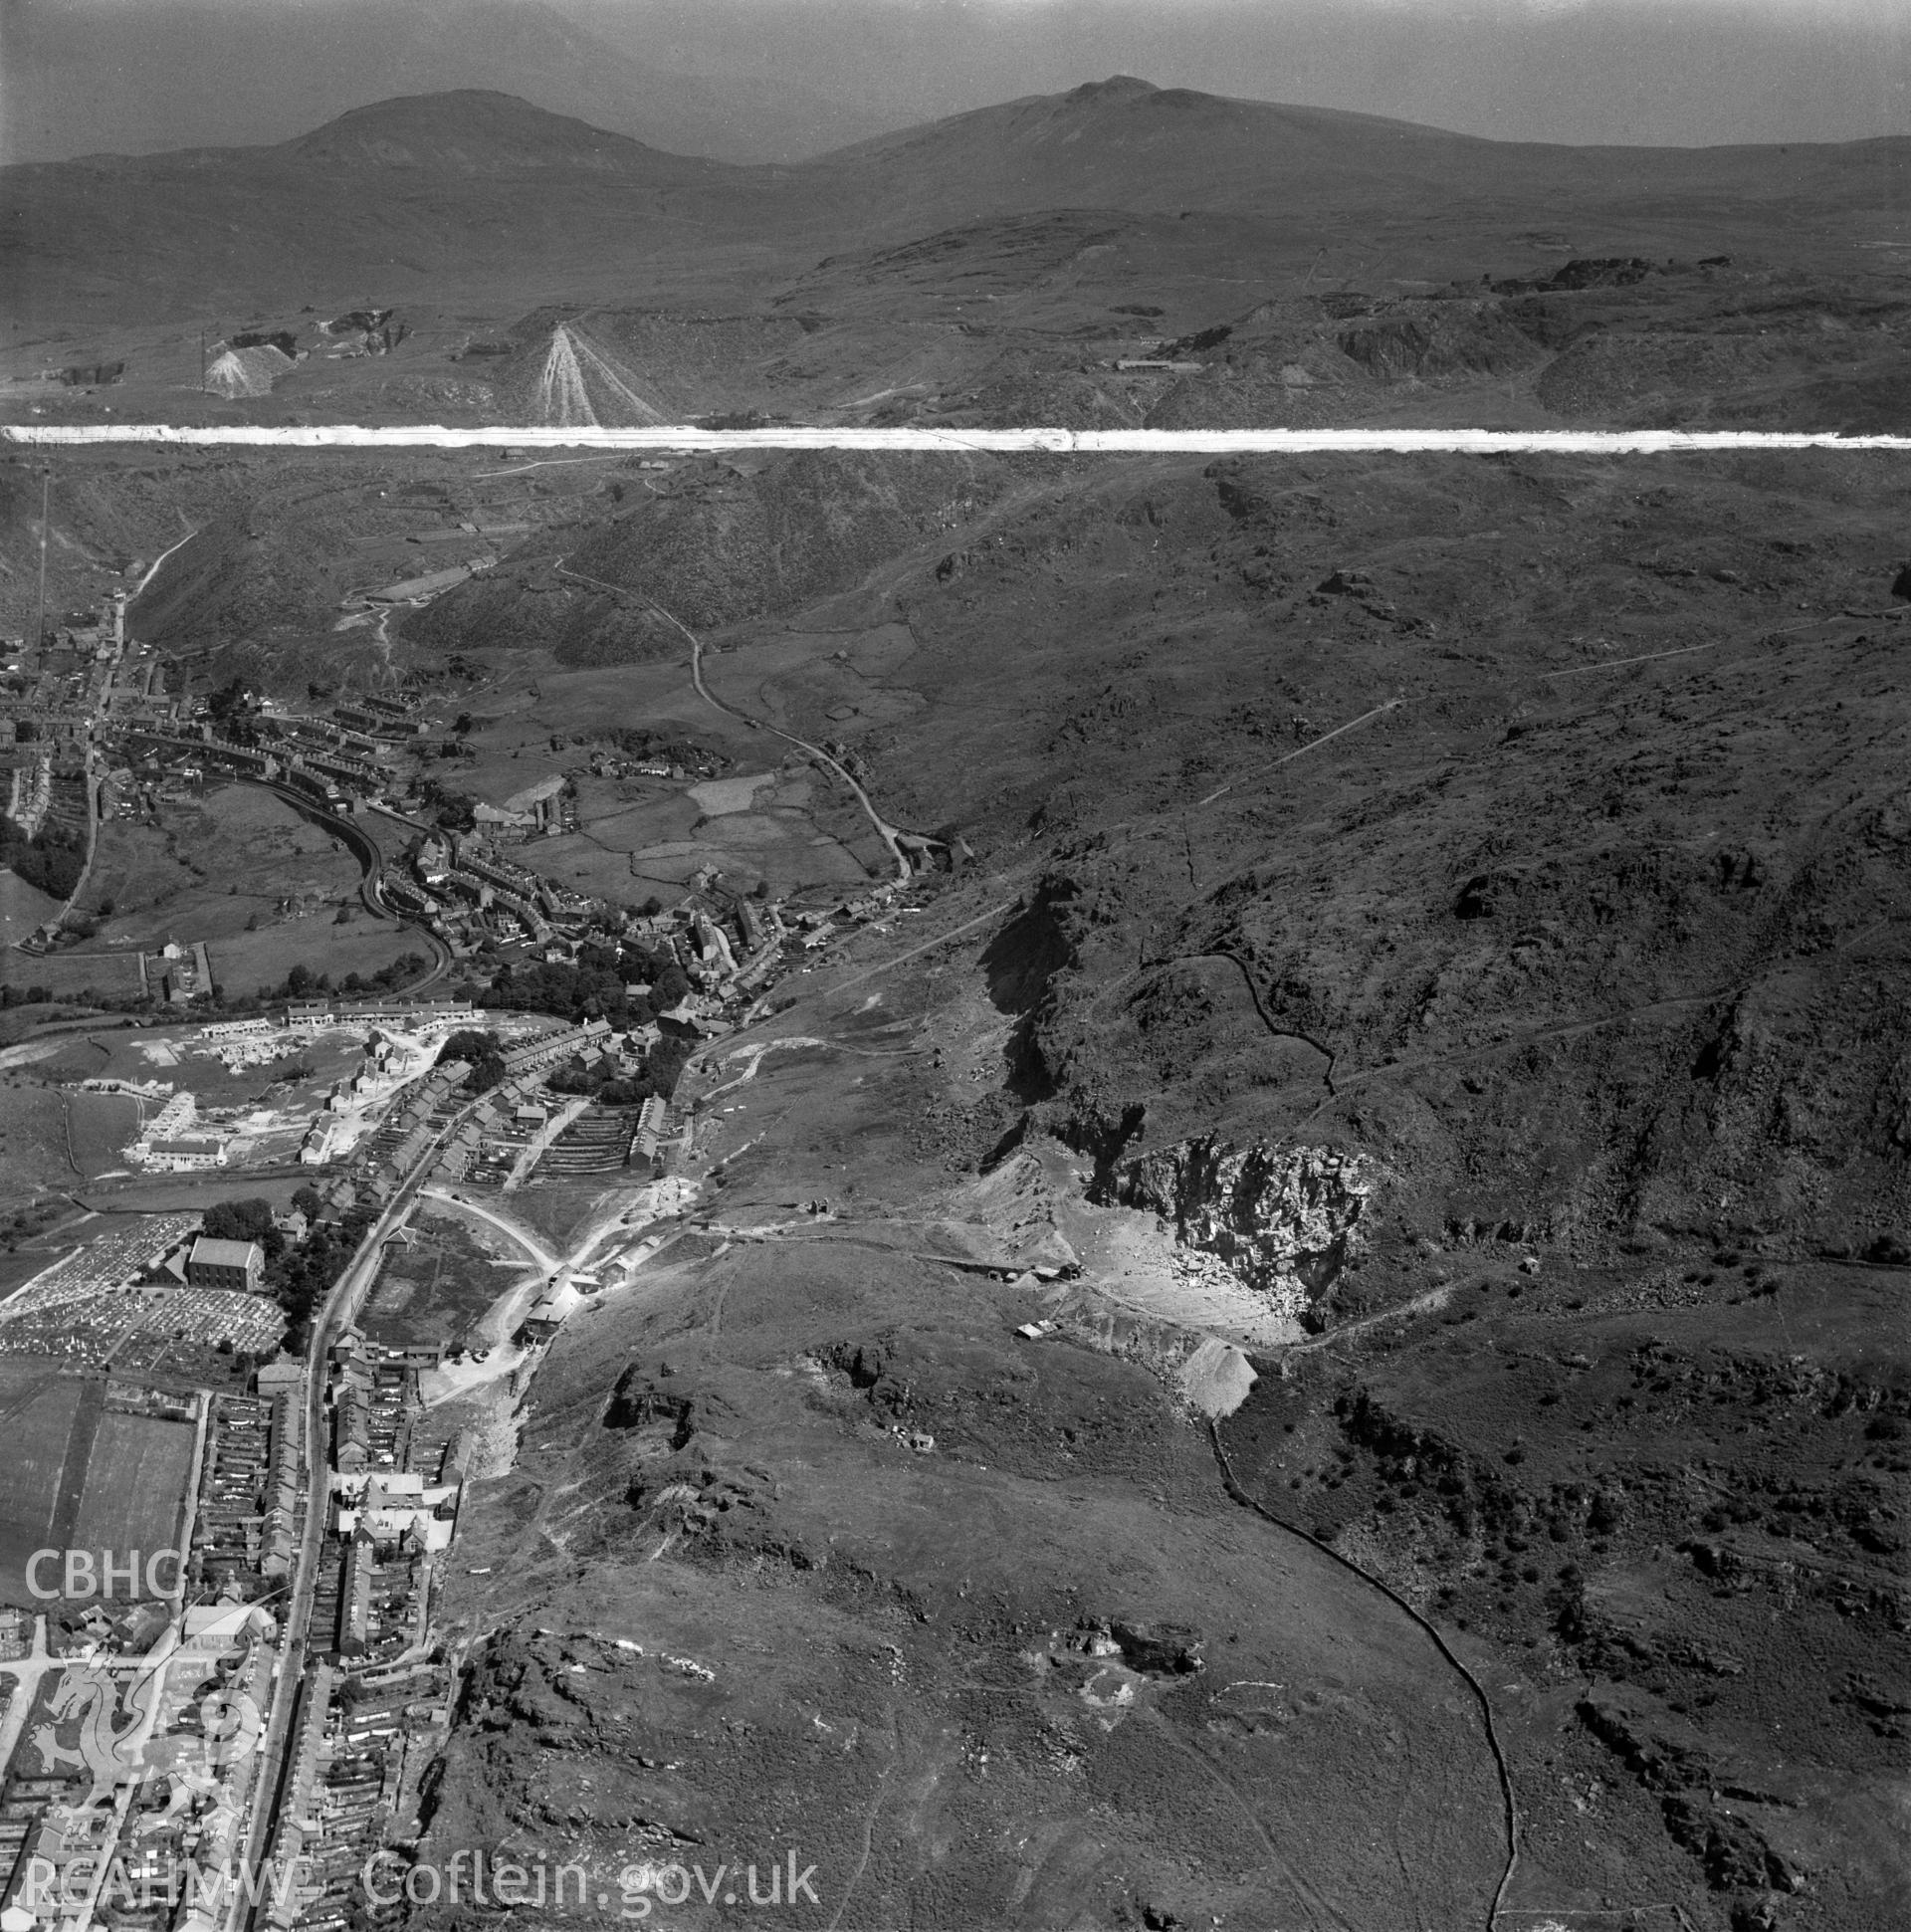 View of Blaenau Ffestiniog showing the construction of the Penygwndwn Estate, commissioned by Cawood Wharton & Co. Ltd.. Oblique aerial photograph, 5?" cut roll film.